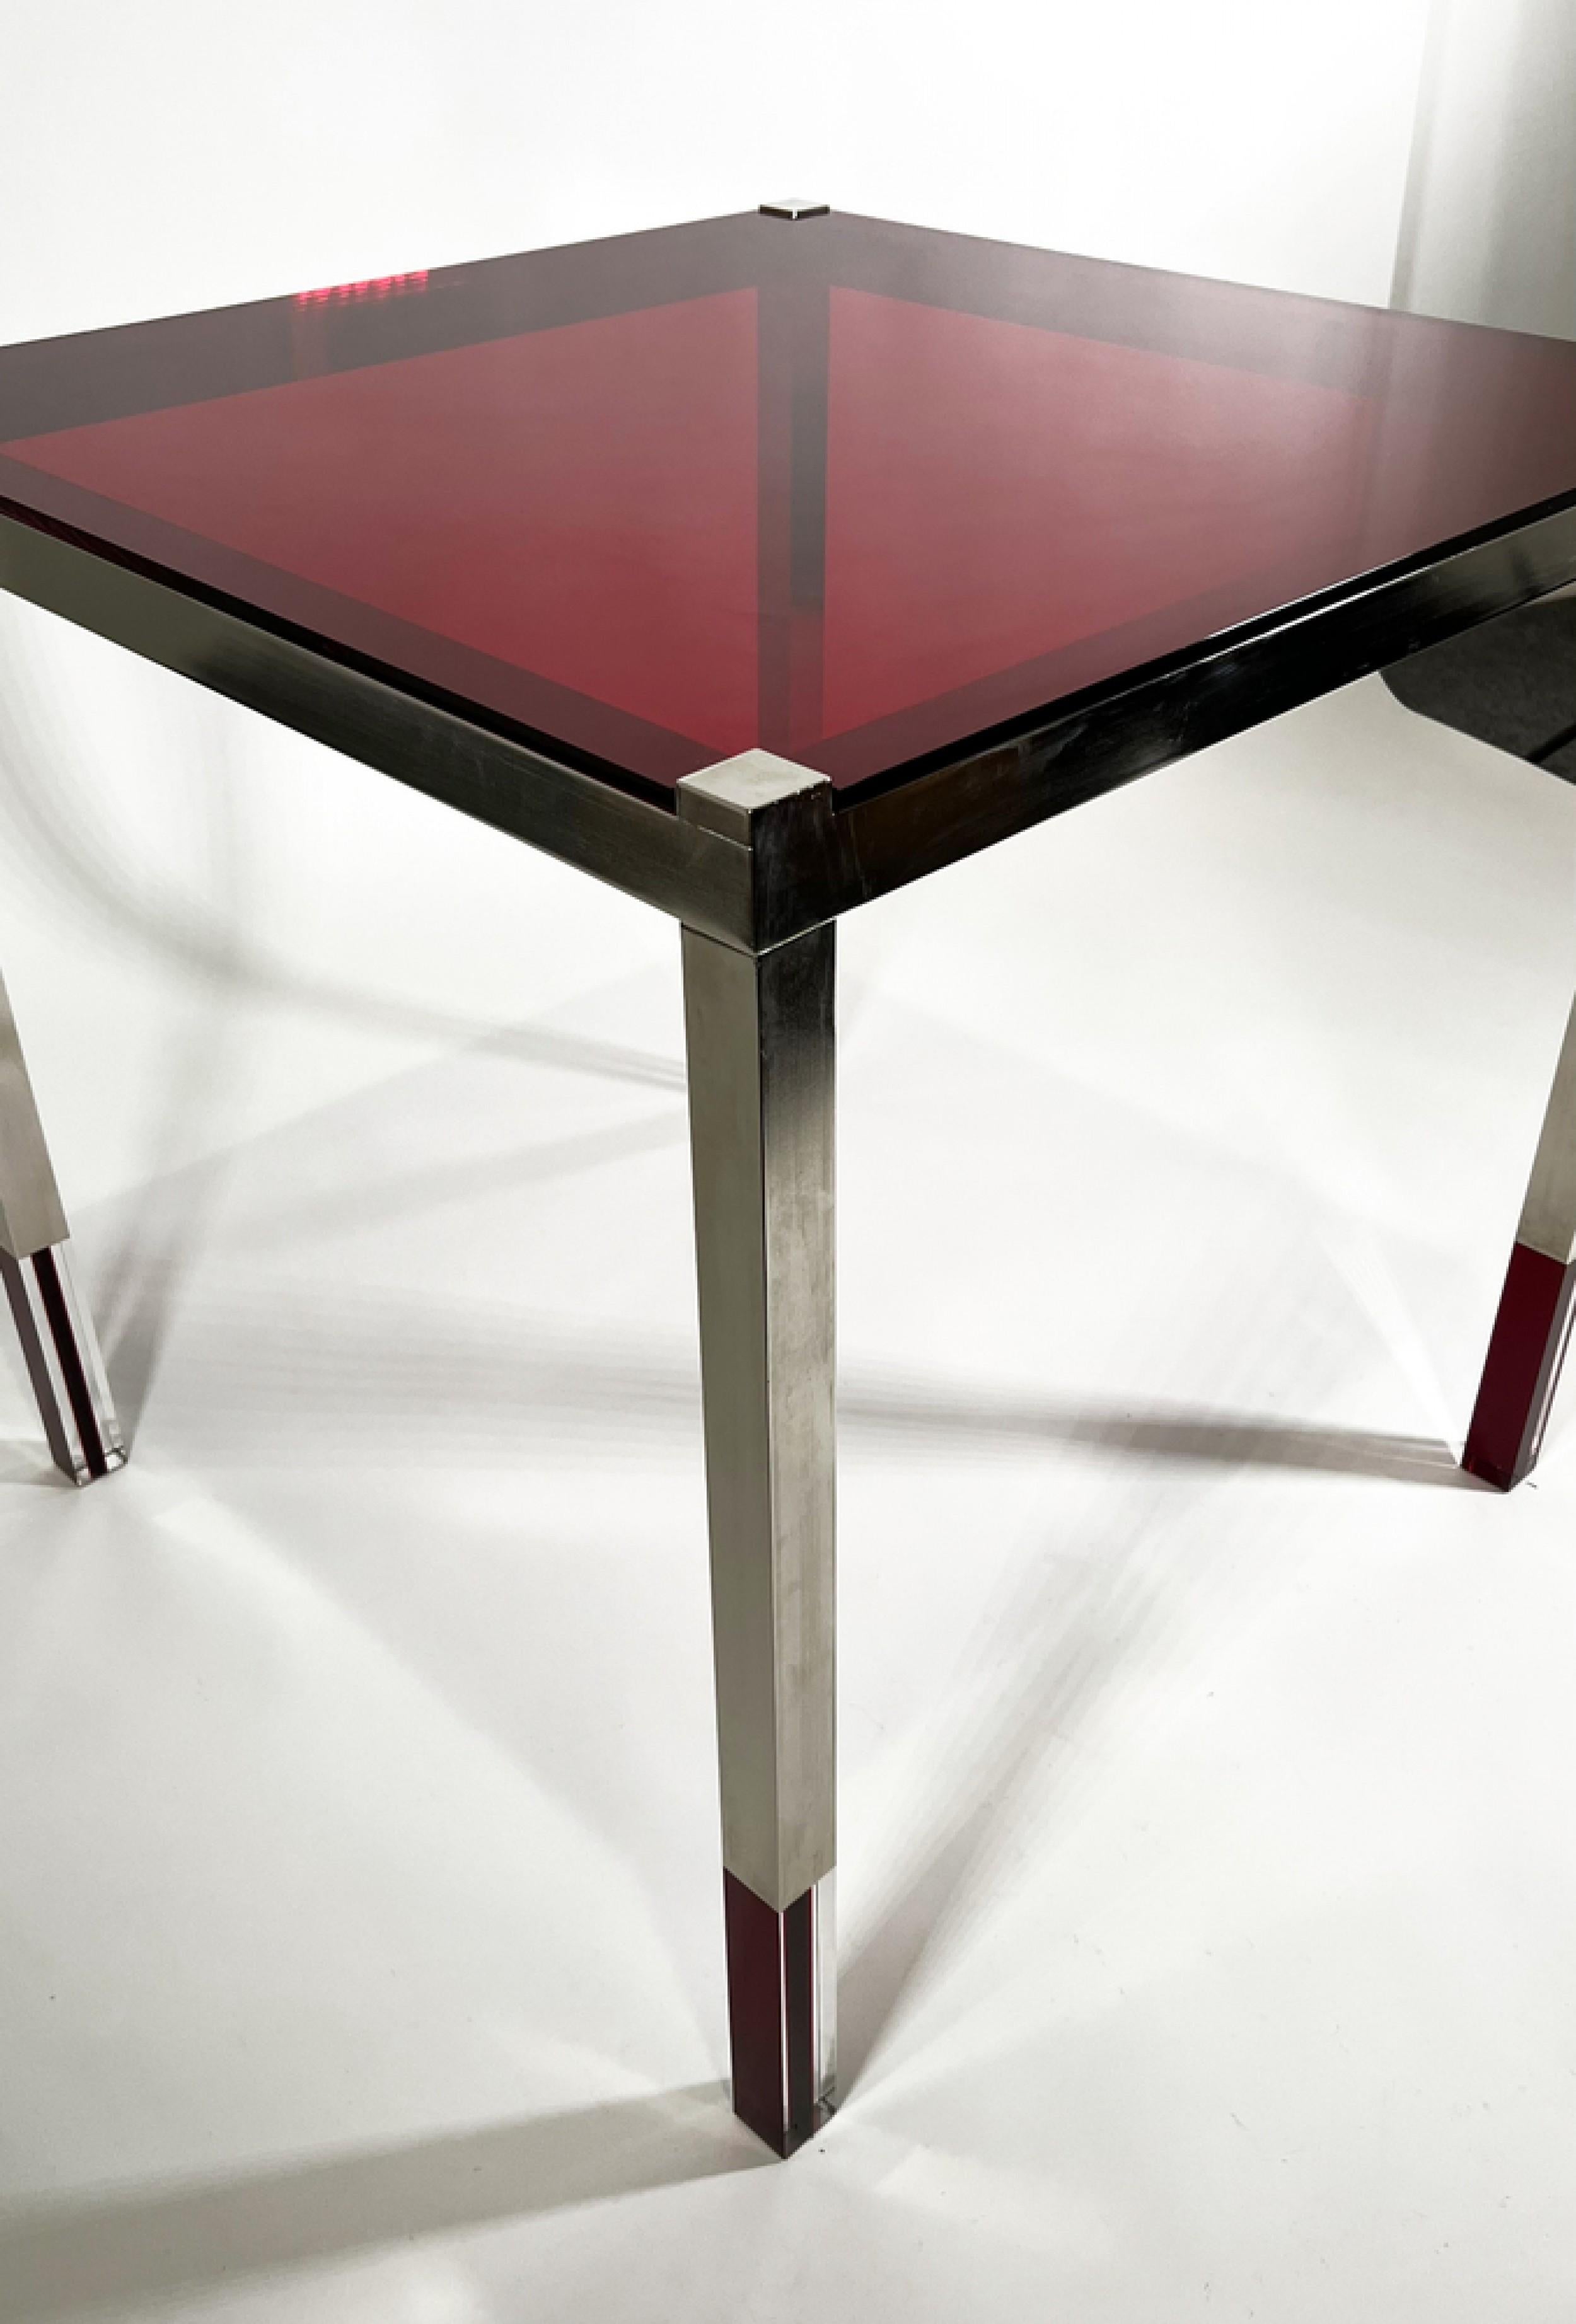 Midcentury American Modern game / end / side table with a polished nickel frame with a red lucite top and clear and red lucite sections in the table\'s legs. (Charles Hollis Jones).